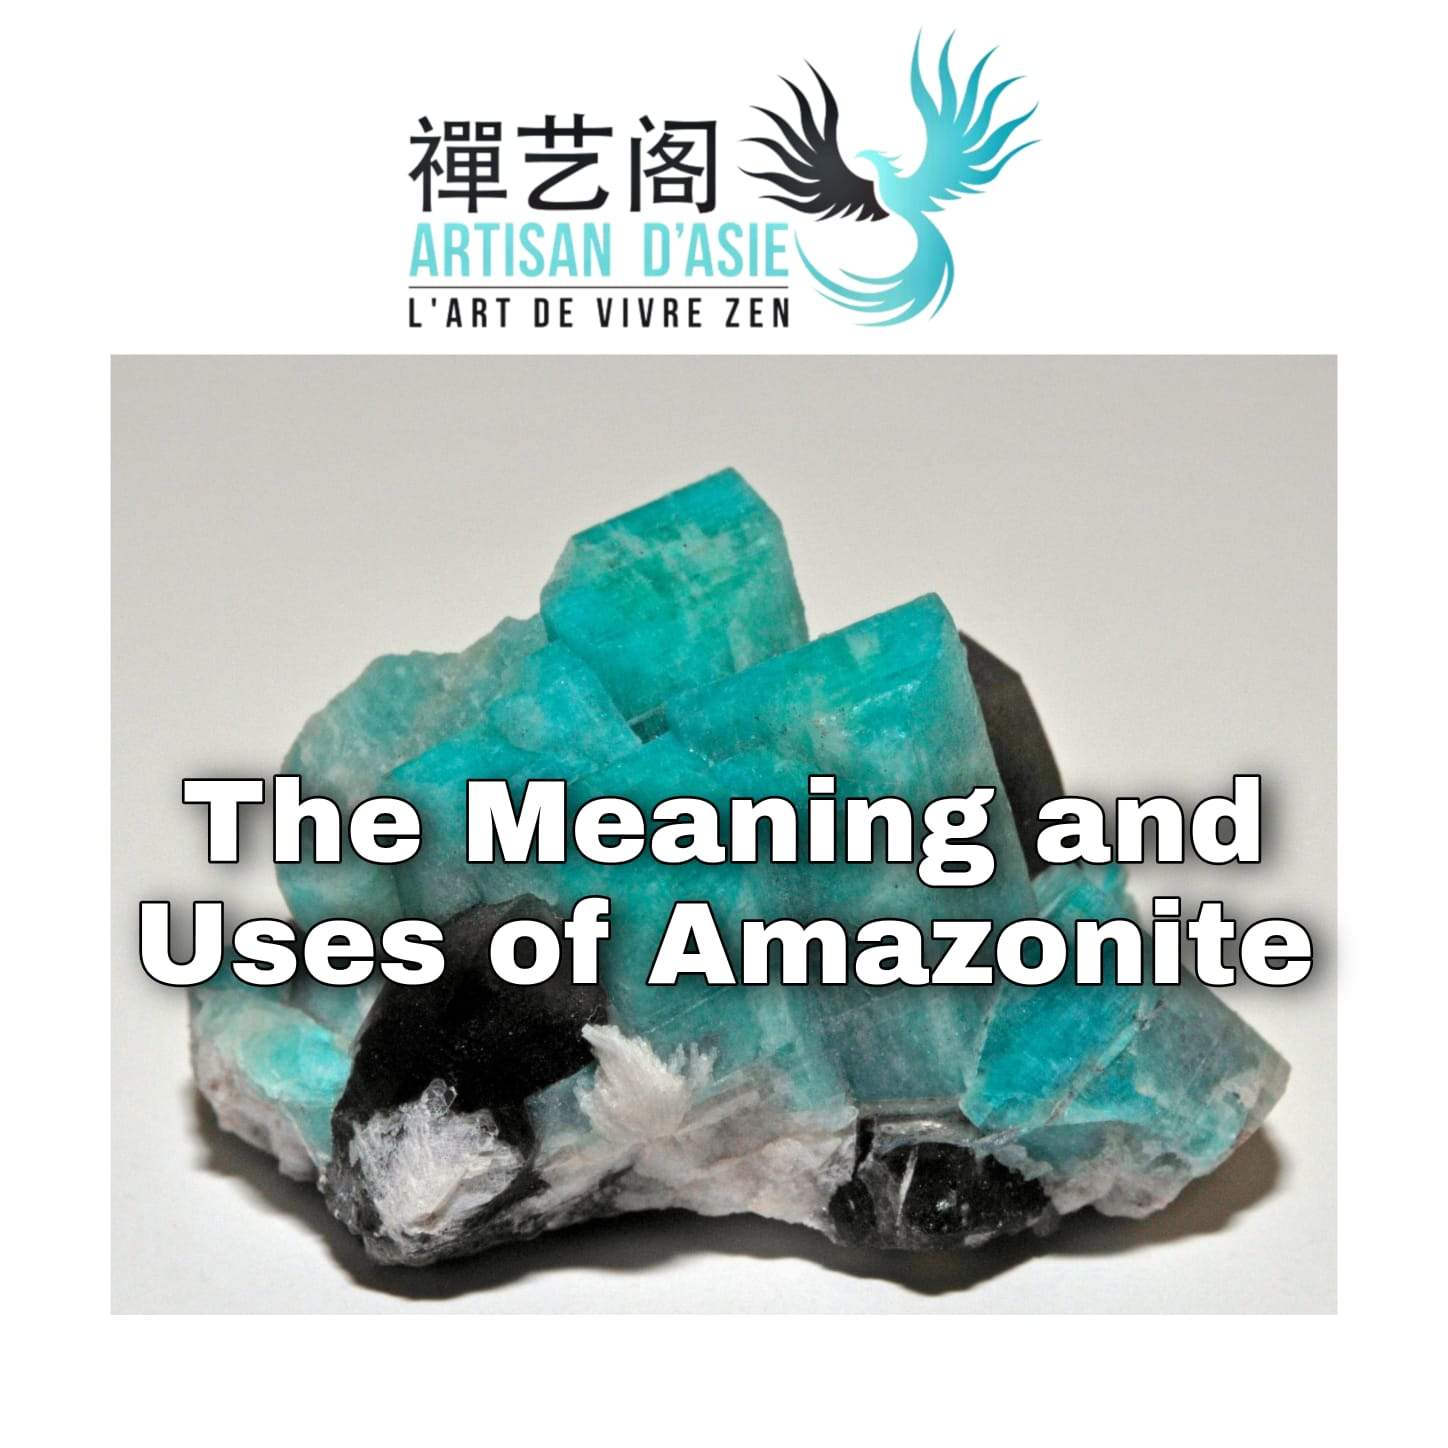 The Meaning and Uses of Amazonite